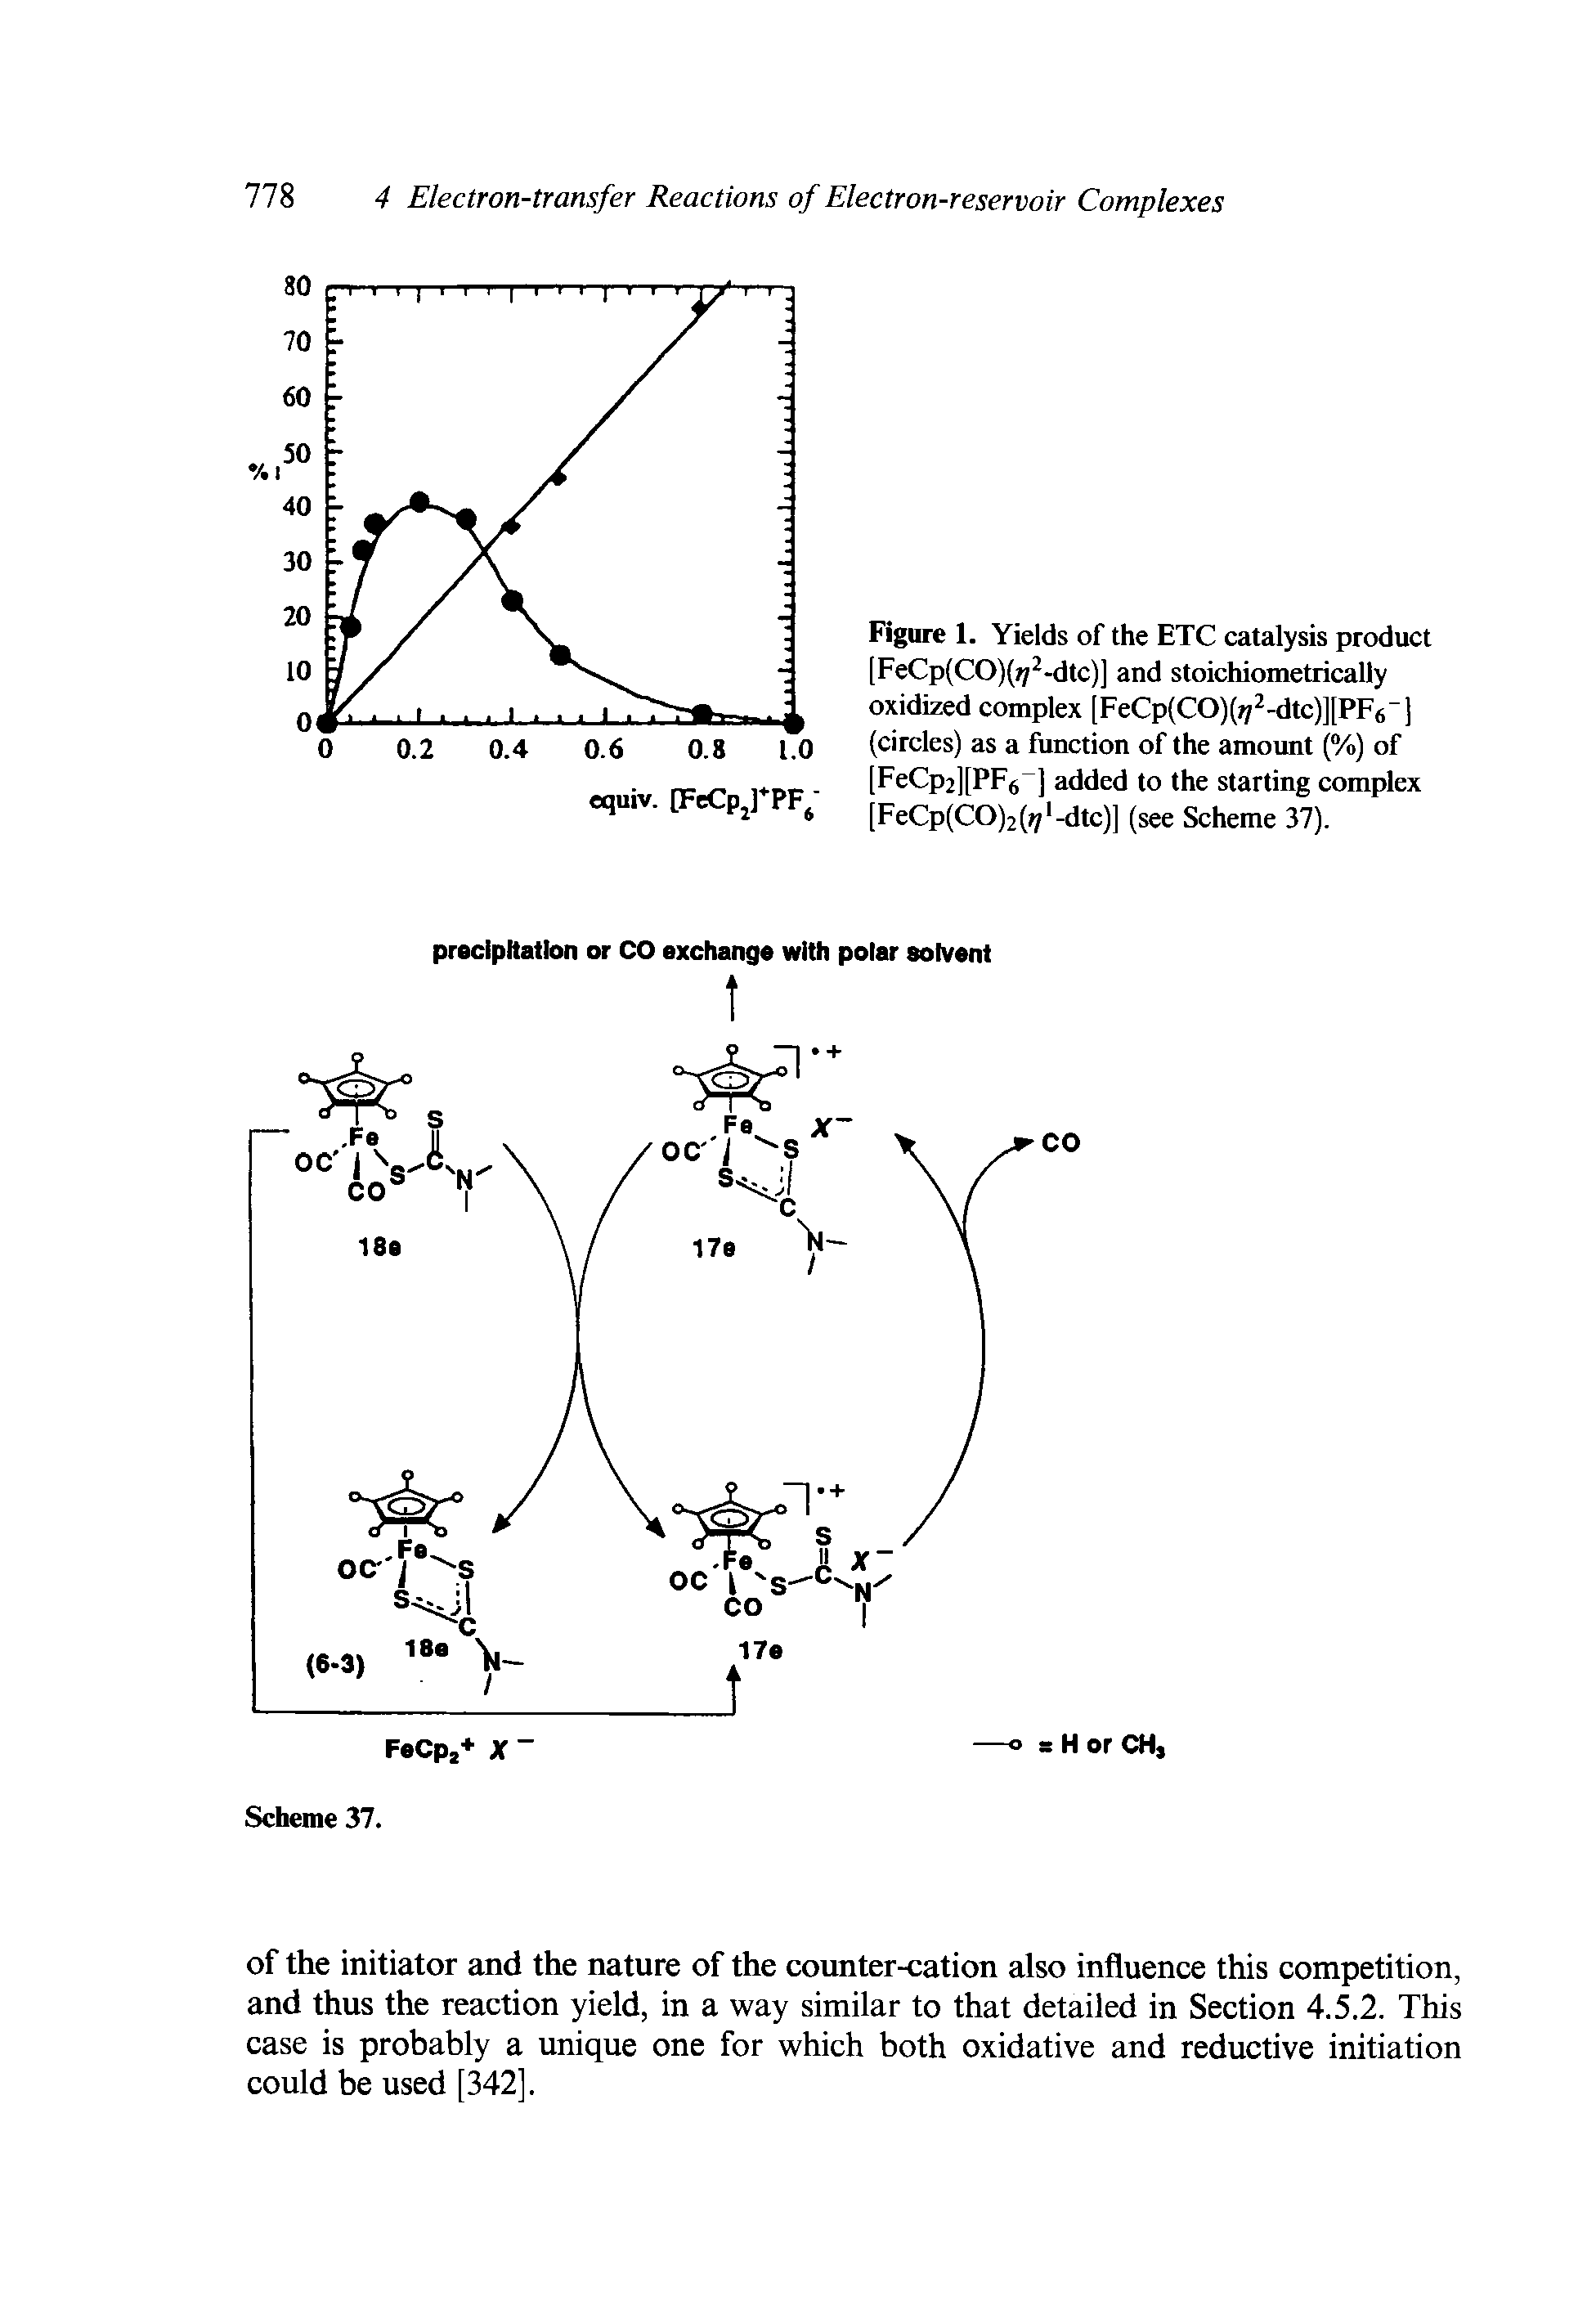 Figure 1. Yields of the ETC catalysis product [FeCp(CO)( / -dtc)] and stoichiometrically oxidized complex [FeCp(CO)( / -dtc)][PF6 l (circles) as a function of the amount (%) of [FeCp2][PFg ] added to the starting complex [FeCp(CO)2(7 -dtc)J (see Scheme 37).